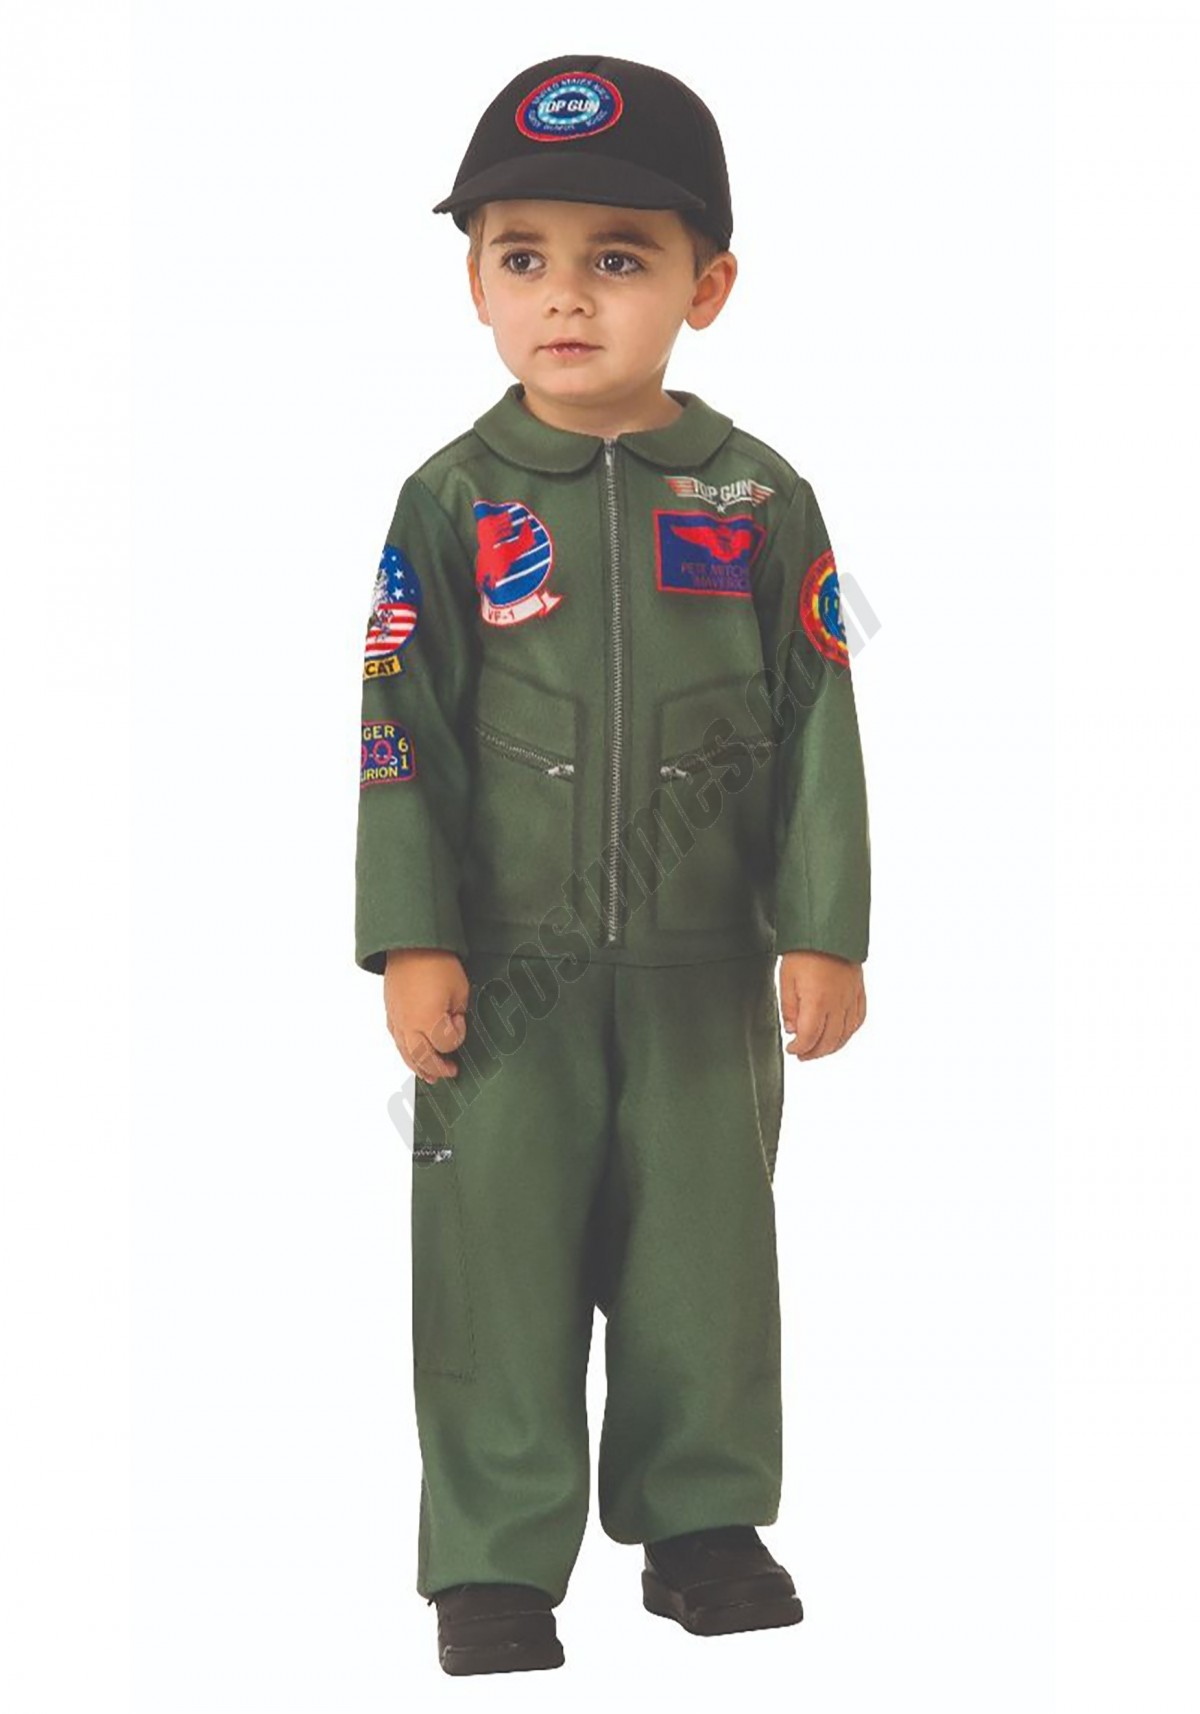 Top Gun Romper Costume for Toddlers Promotions - -0